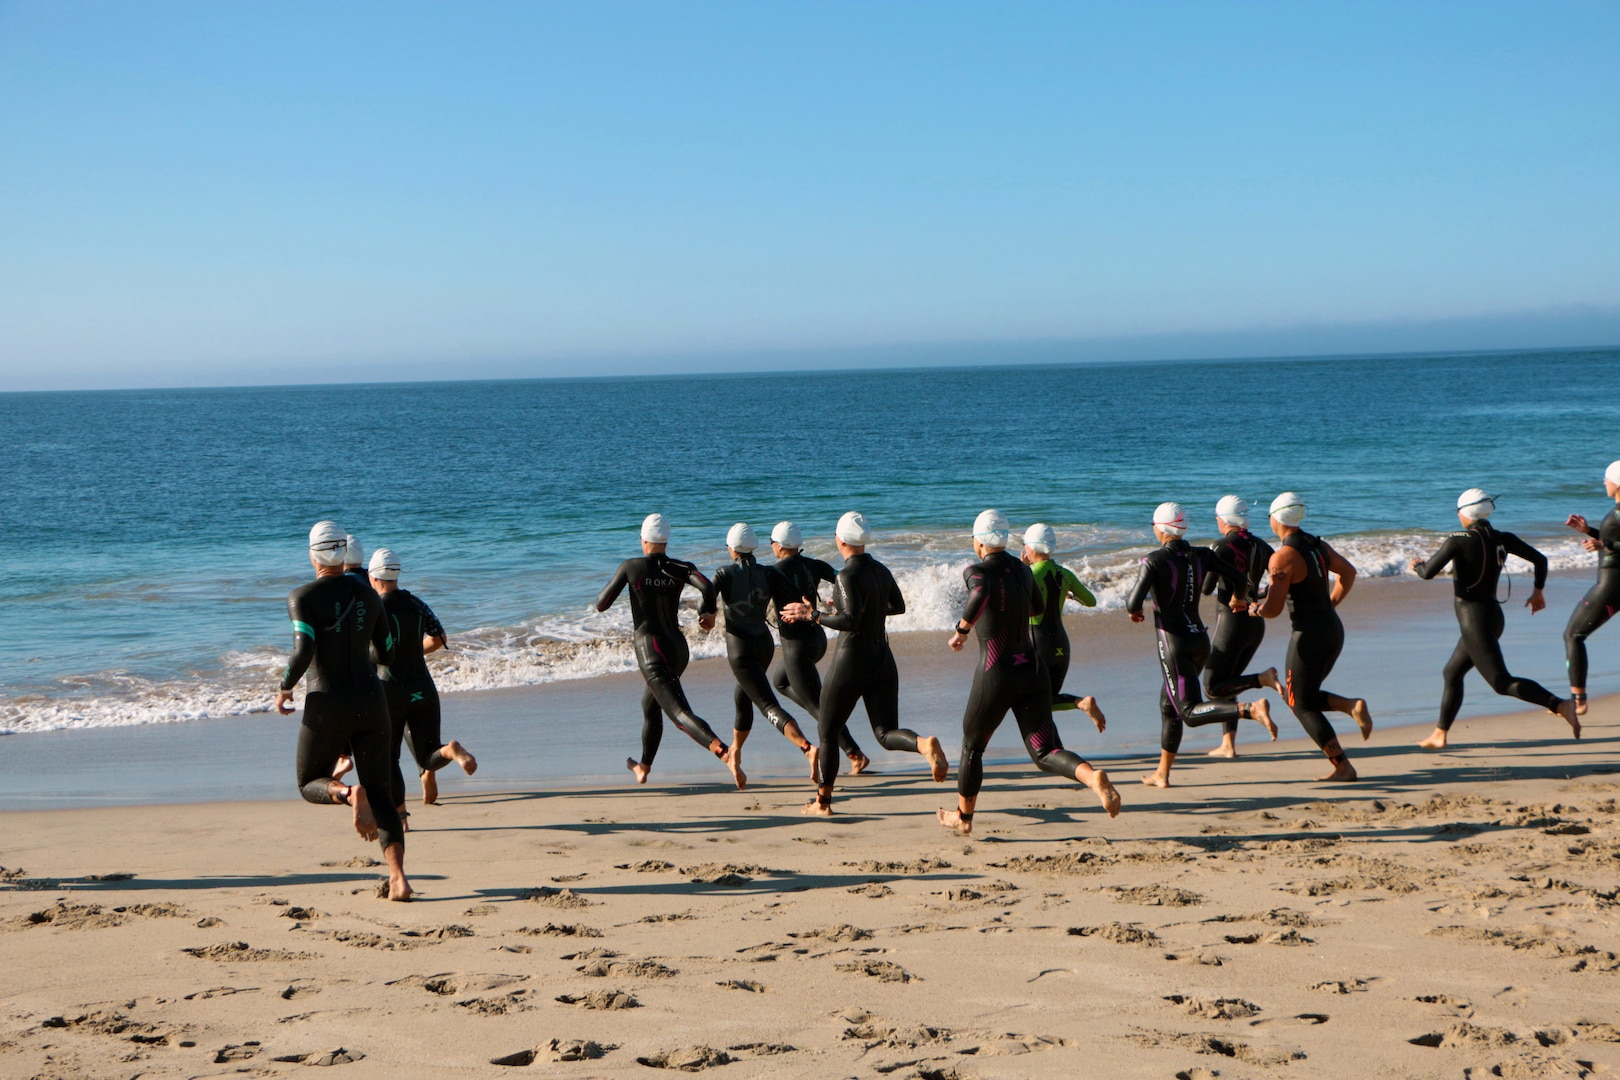 Athletes enter the Pacific Ocean at Point Mugu Beach for the start of the 2021 Armed Forces Triathlon Championship held on 11 September.  Service members from the Marine Corps, Navy (with Coast Guard) personnel), and Air Force (with Space Force personnel) compete for gold.  (Department of Defense Photo, Released)